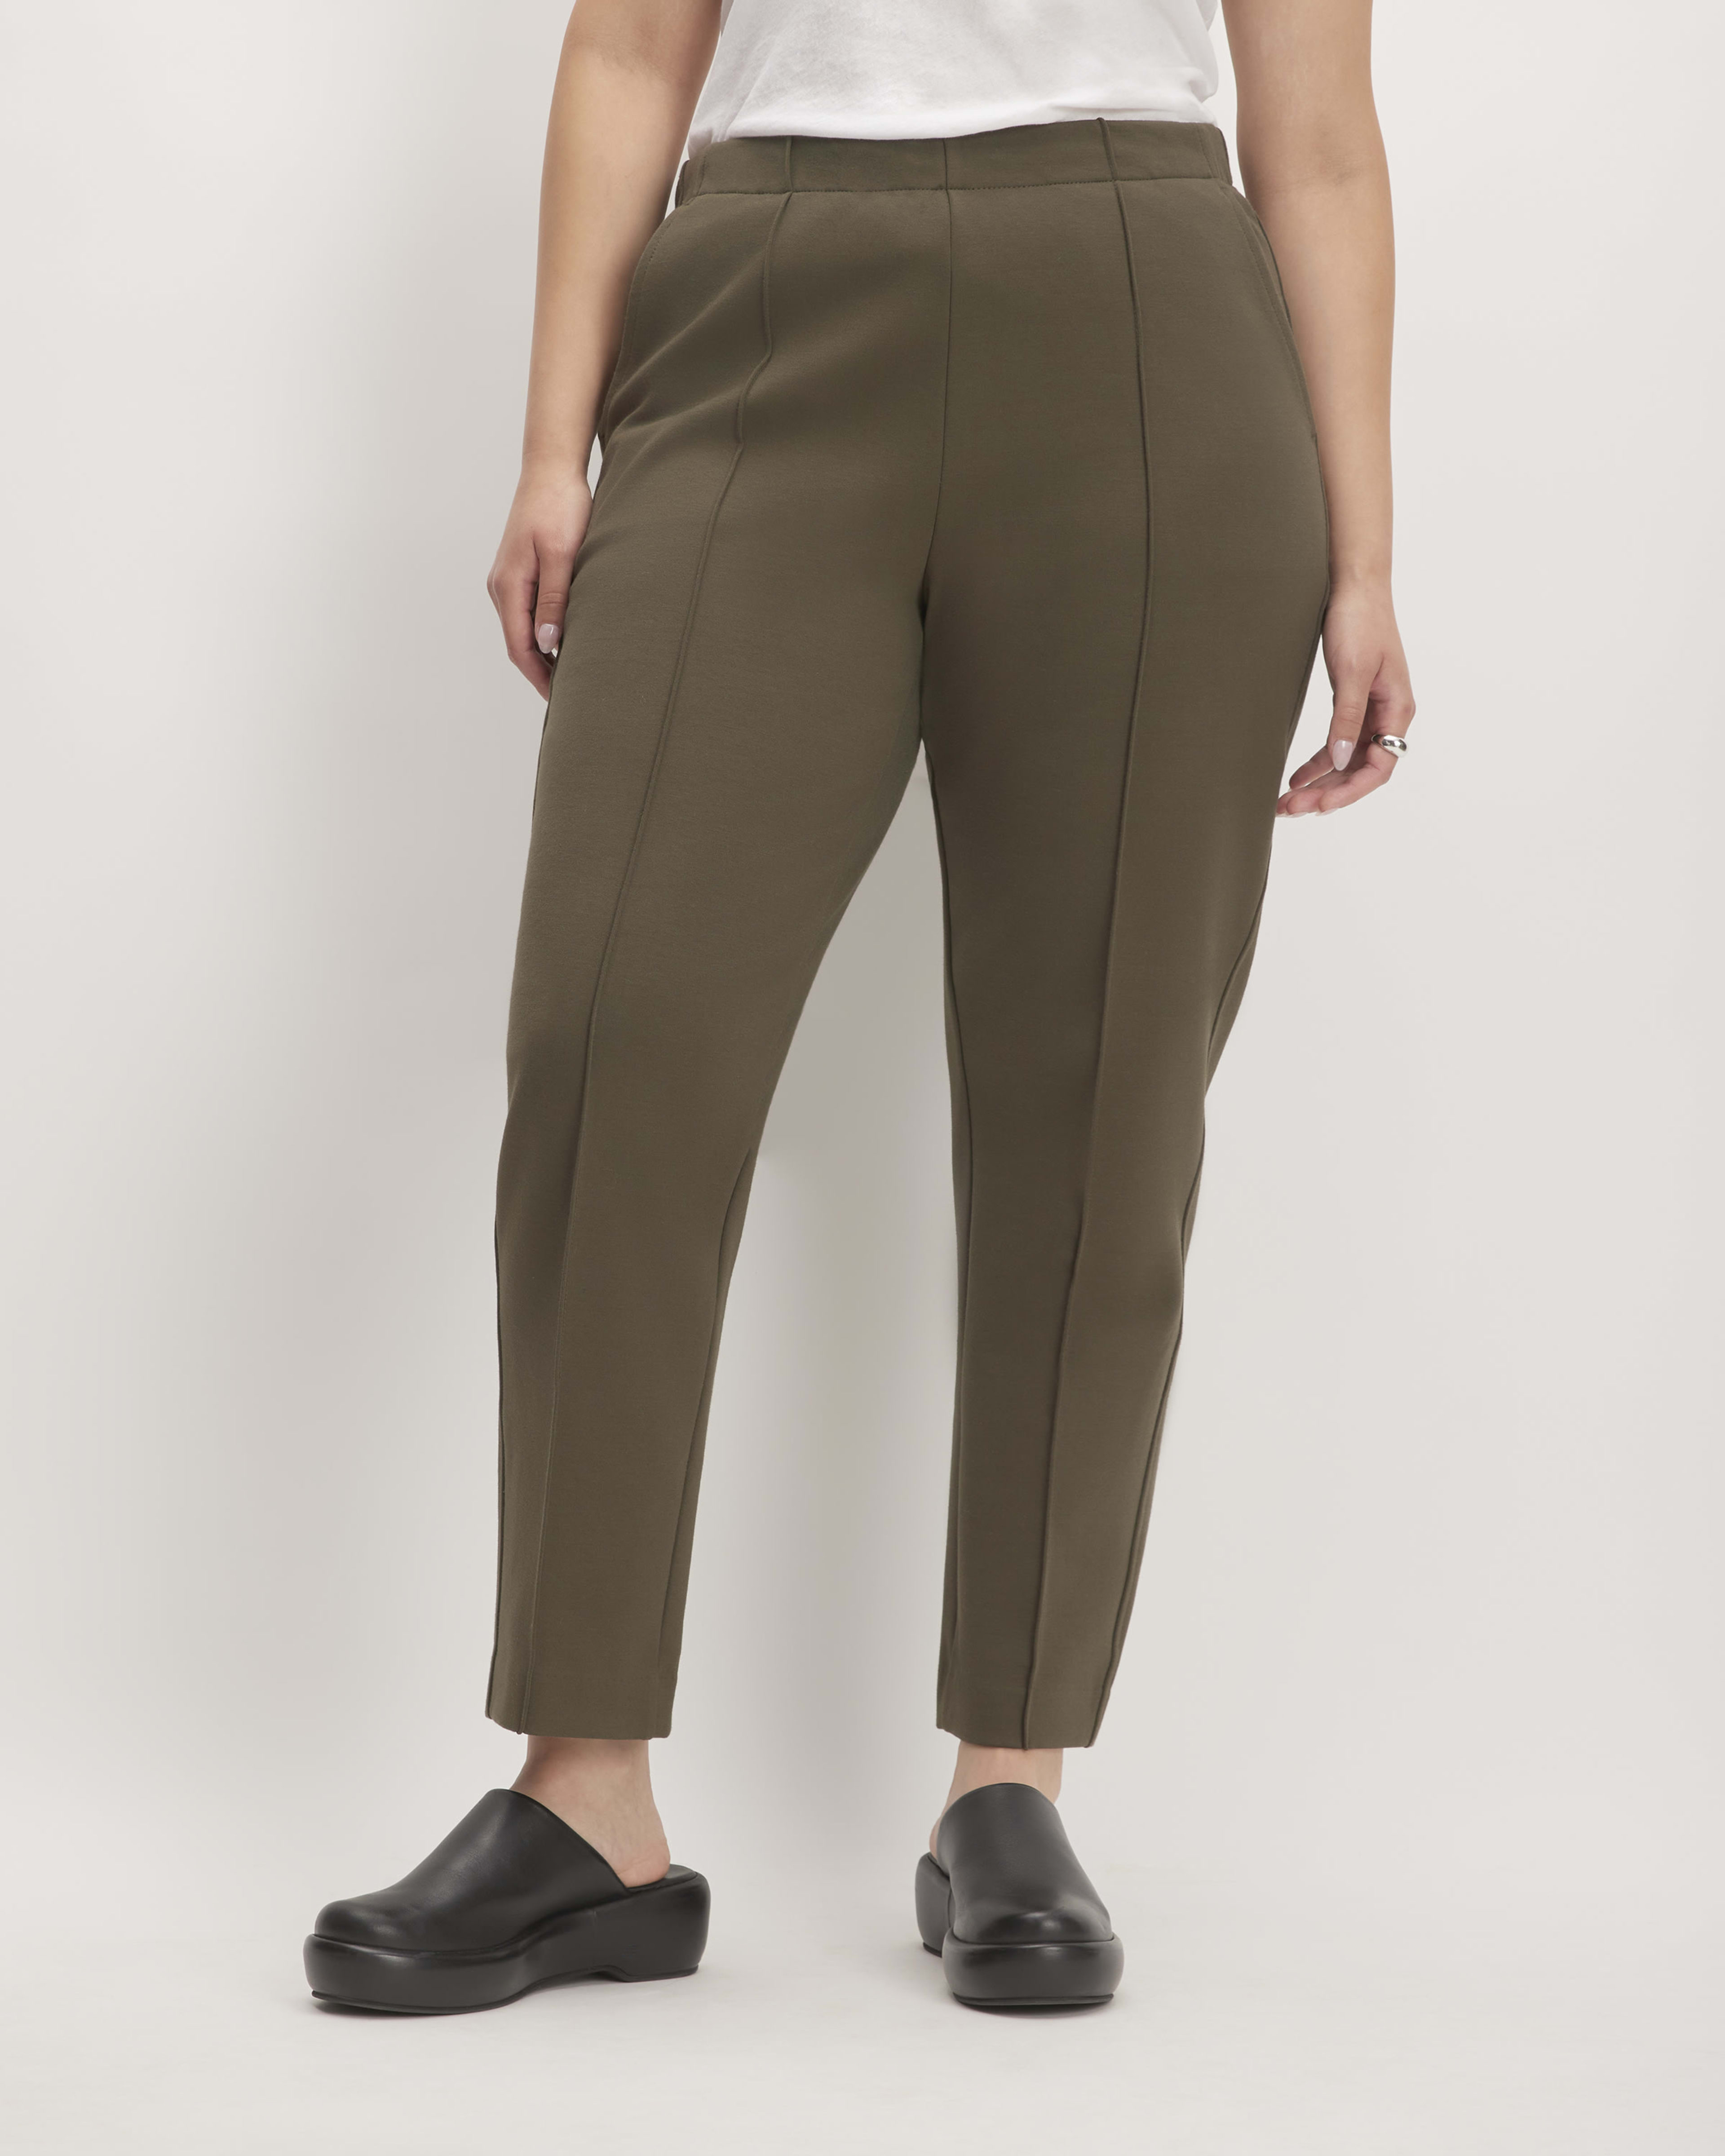 Womens EVERLANE Stretch Ponte Slim Fit Crop Work Pant Trouser 2 Olive Green